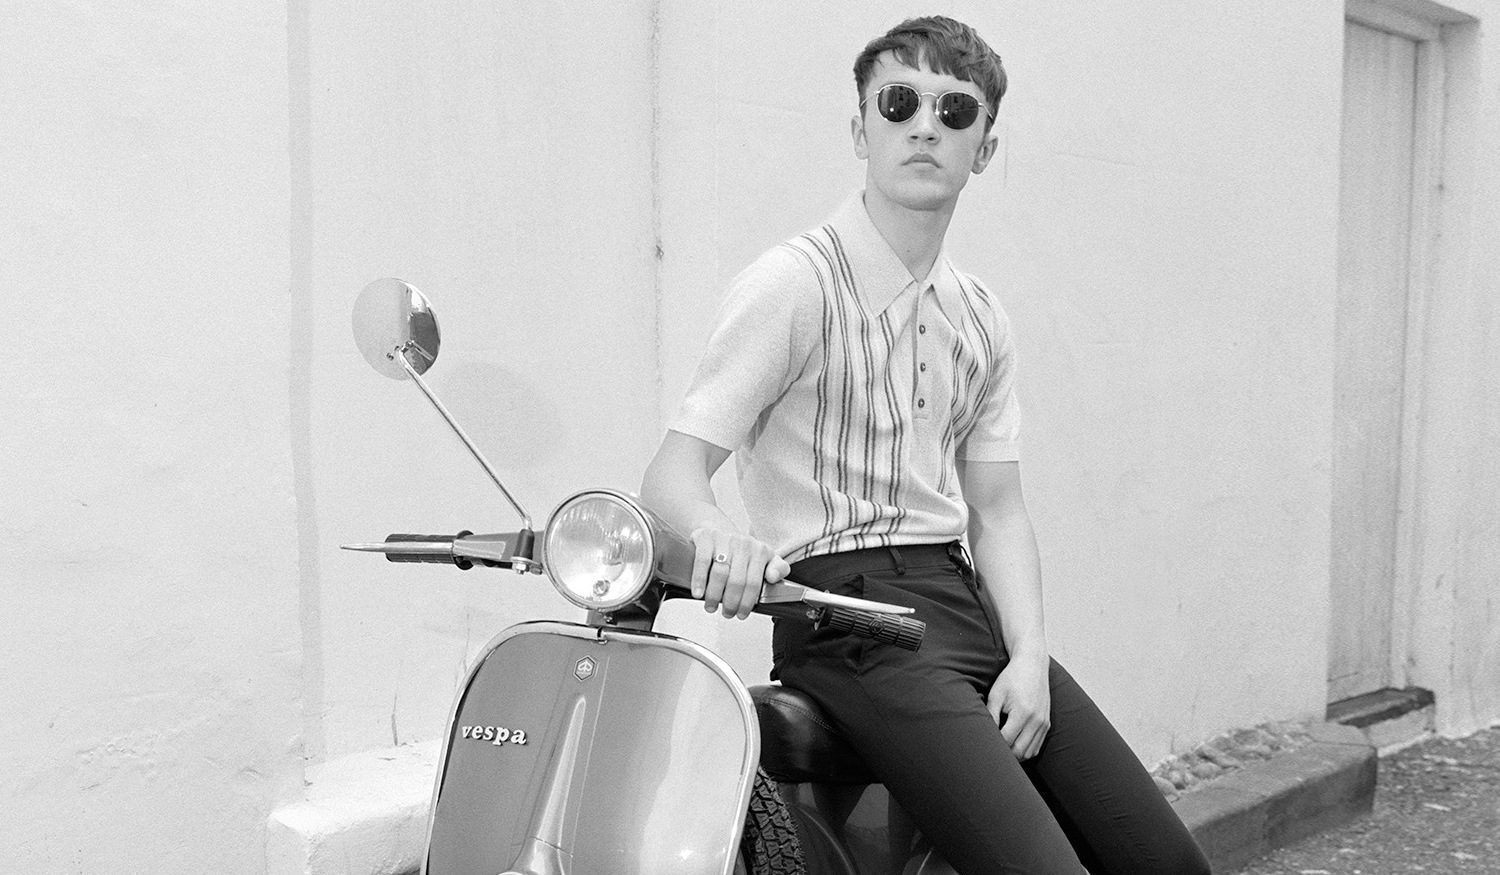 Mod Fashion: A Modern Man's Guide To A Timeless Look